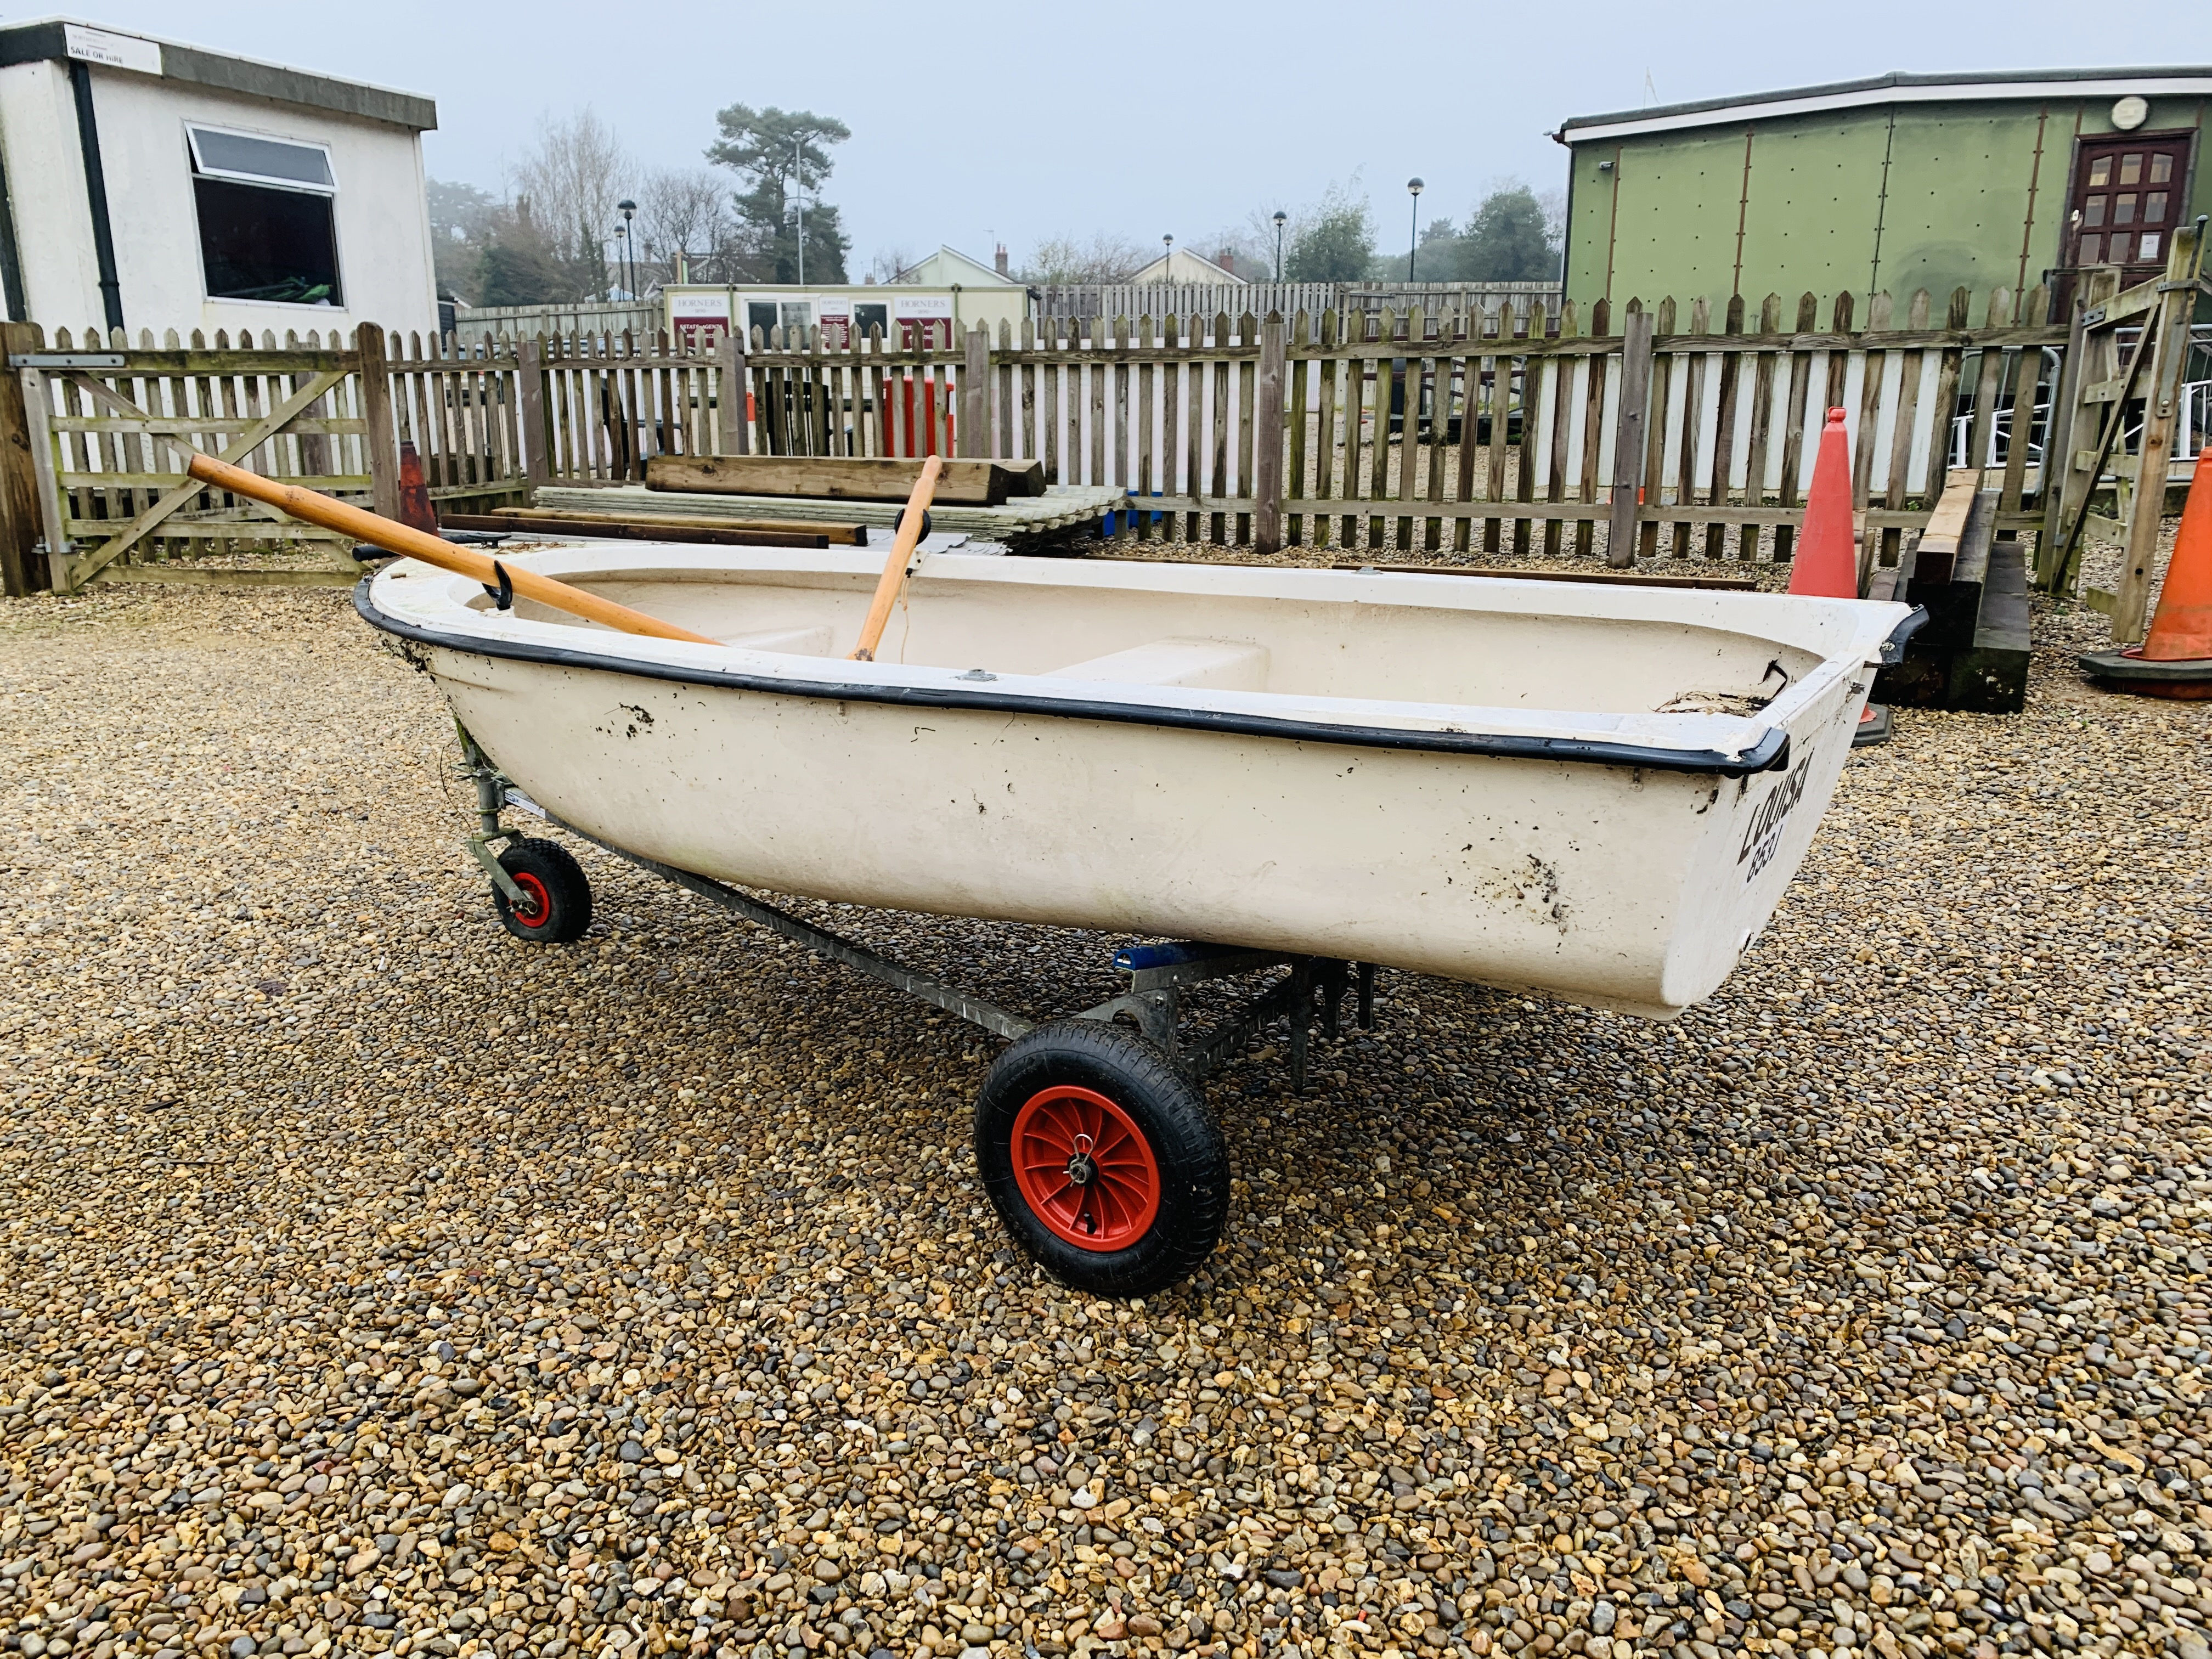 A 10FT FIBREGLASS ROWING DINGHY ON LAUNCHING TRAILER WITH OARS, - Image 8 of 12